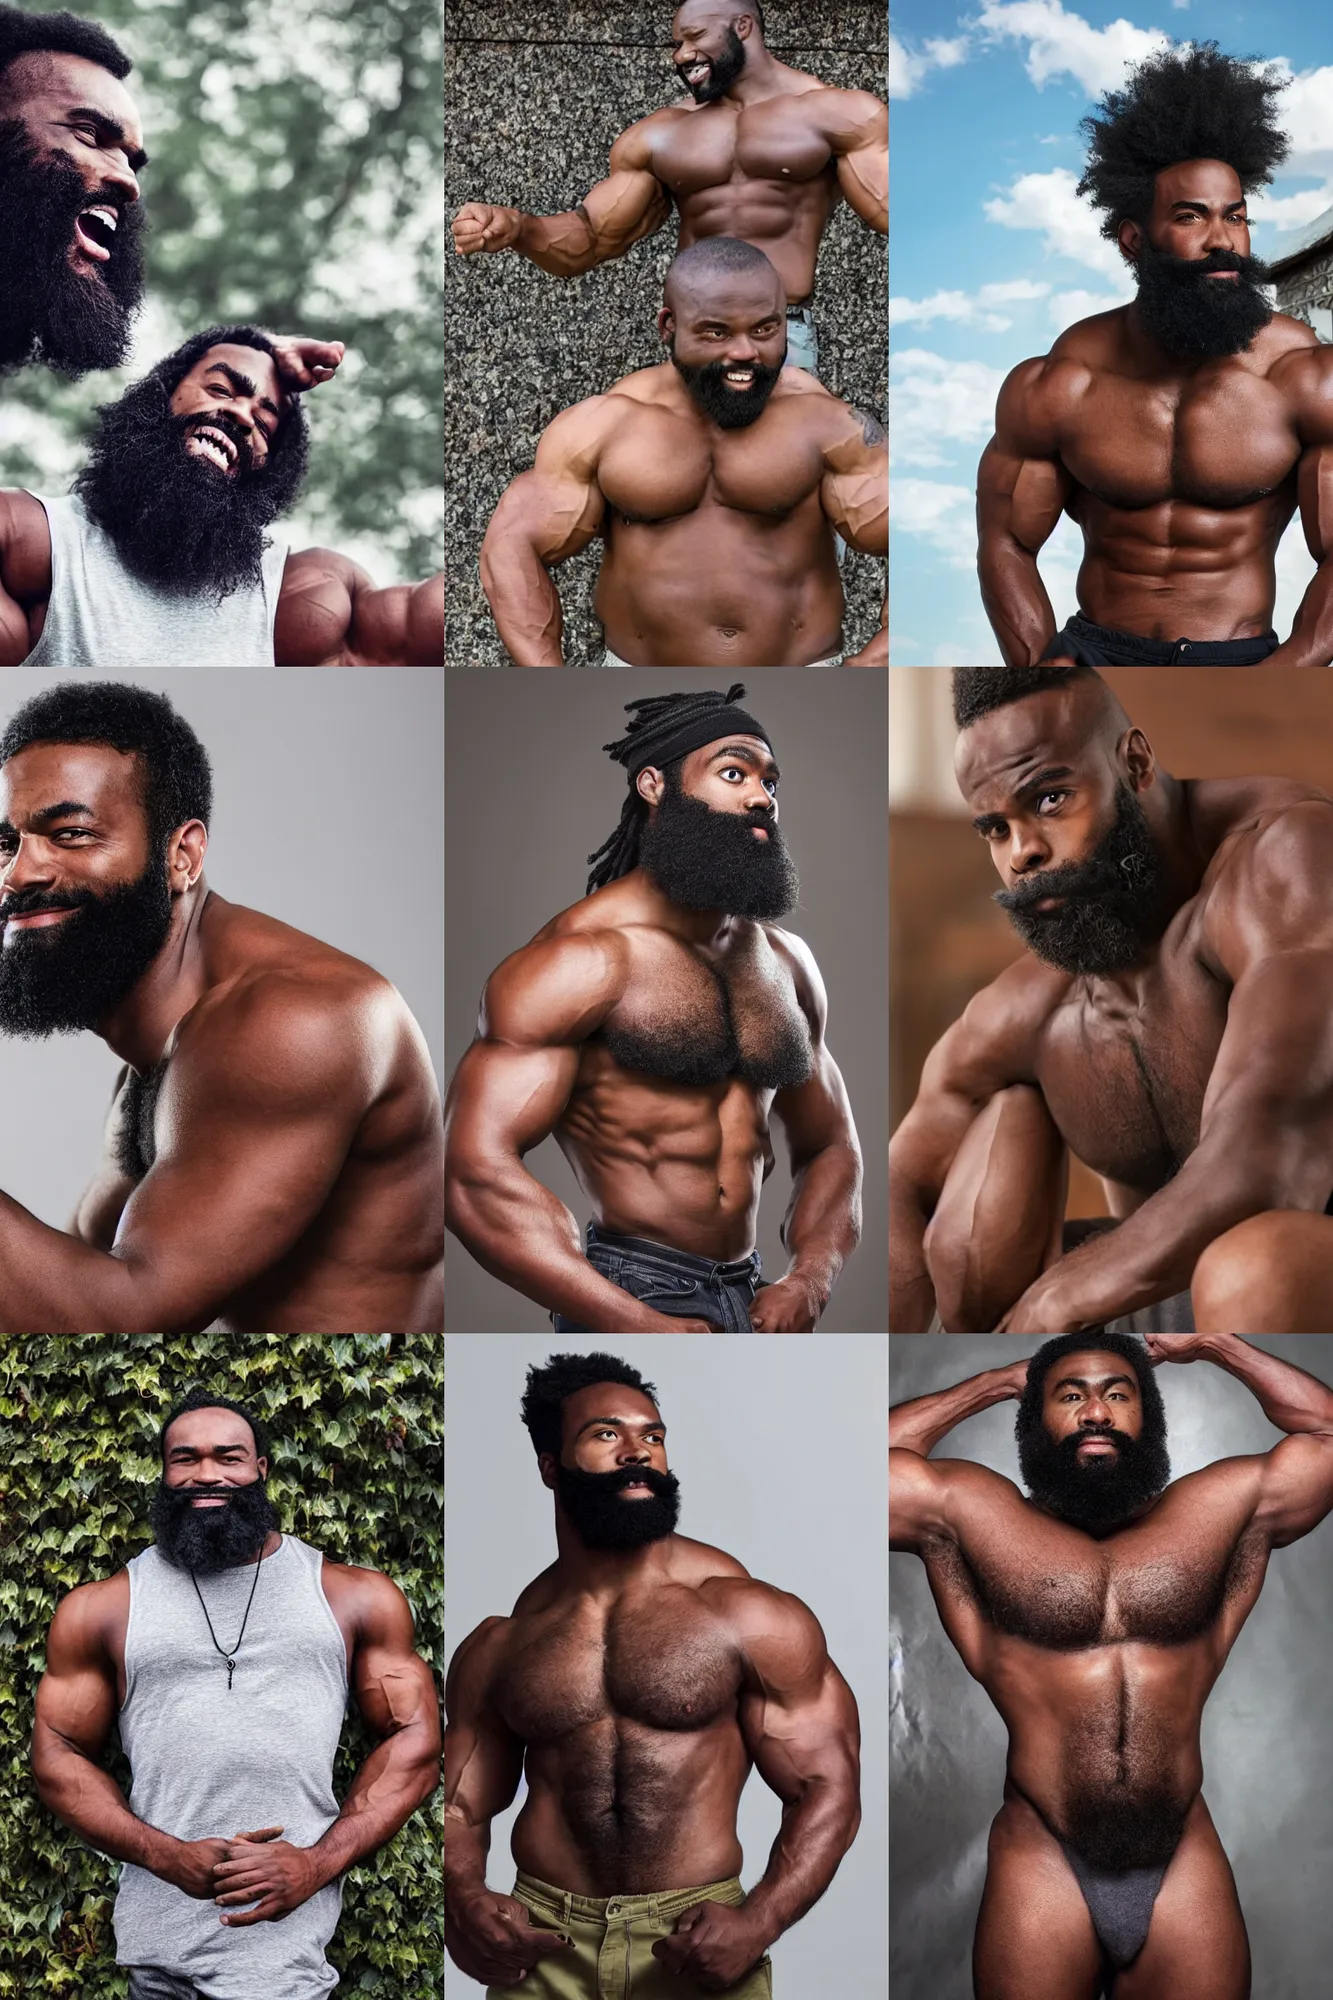 Giga Chad a Sensuous Extremely Hairy Black BodyHaired Super